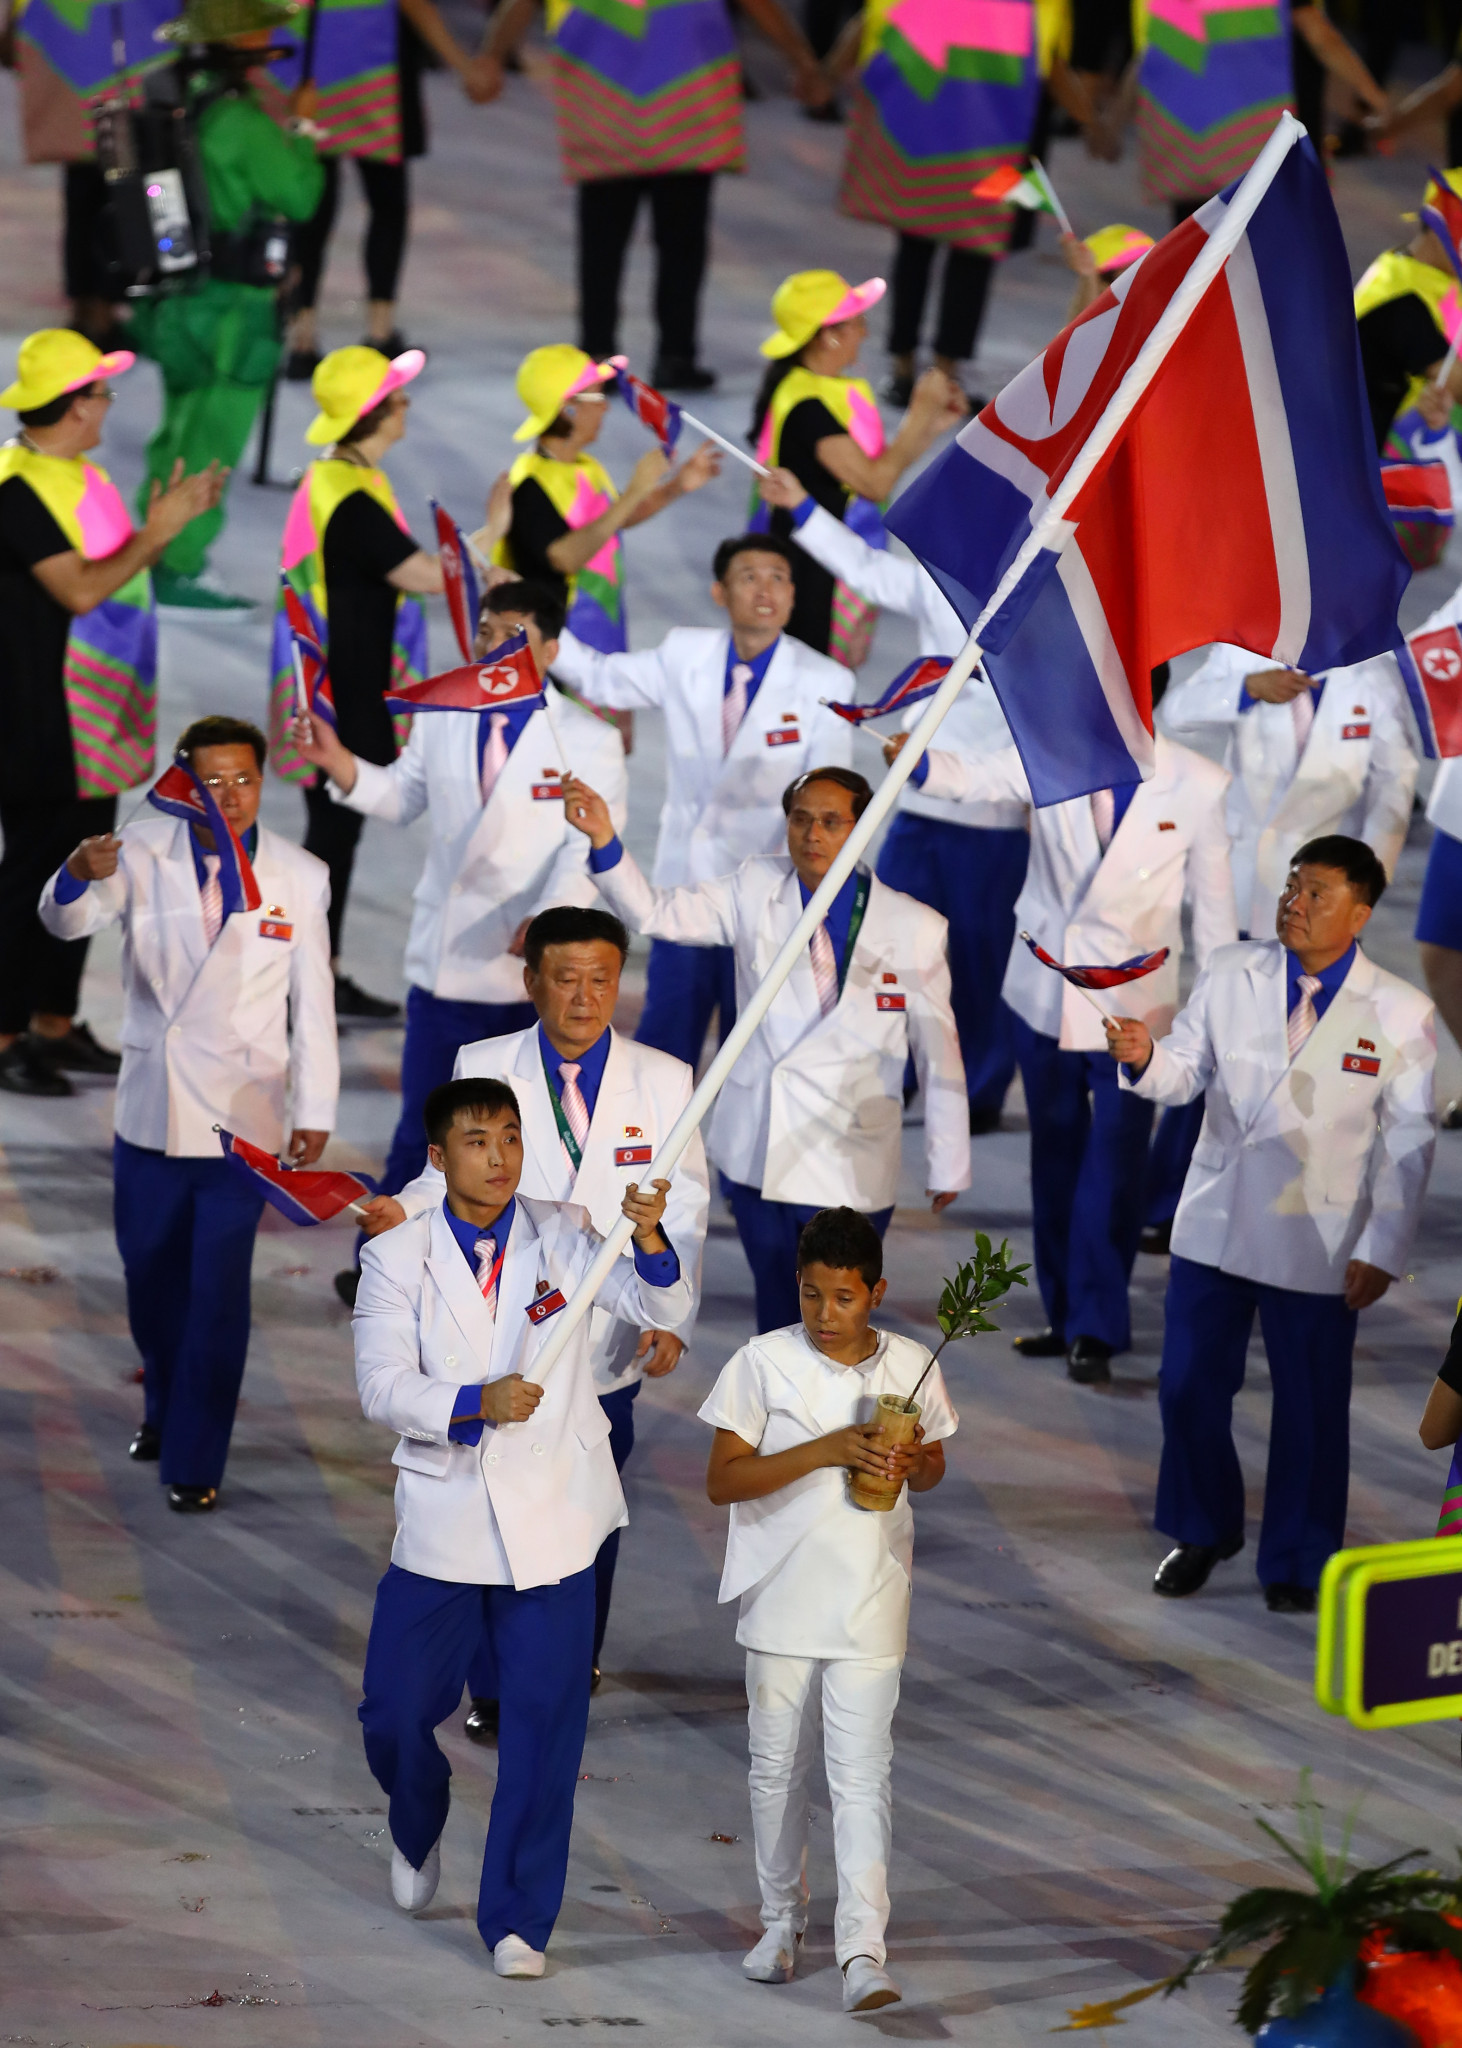 Japan to consider allowing North Korean athletes entry for Tokyo 2020